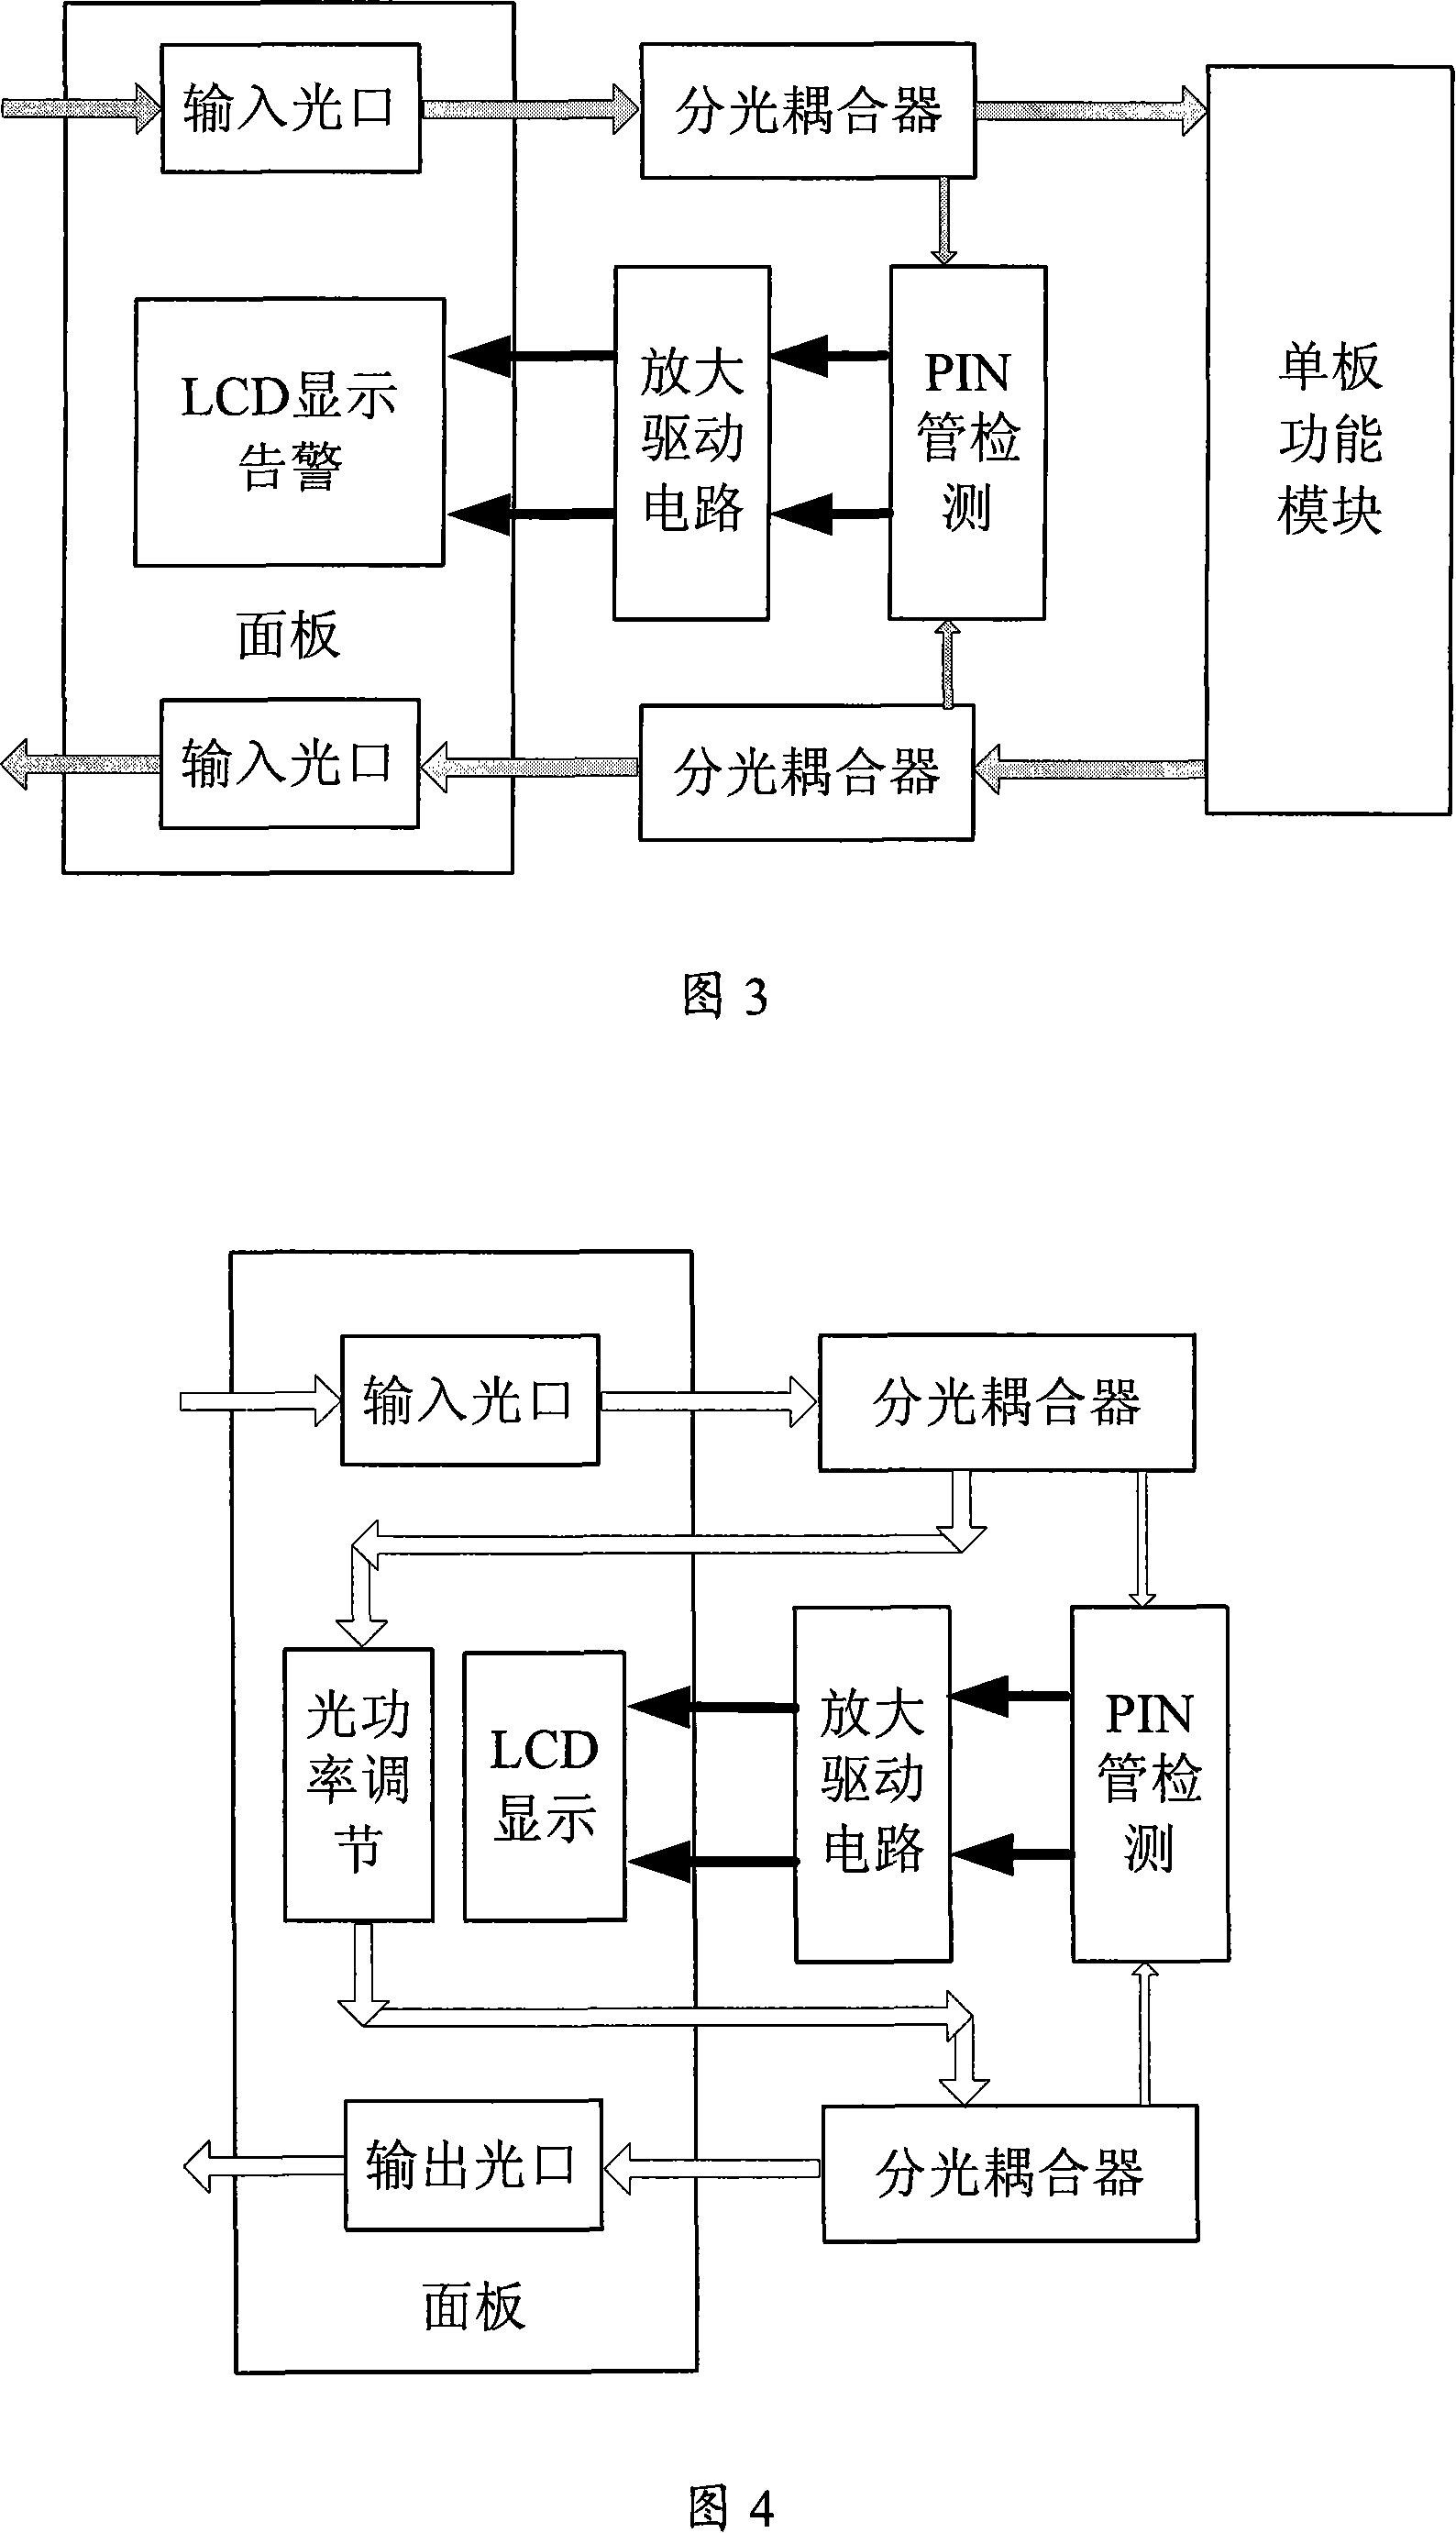 Optical power display and regulation device